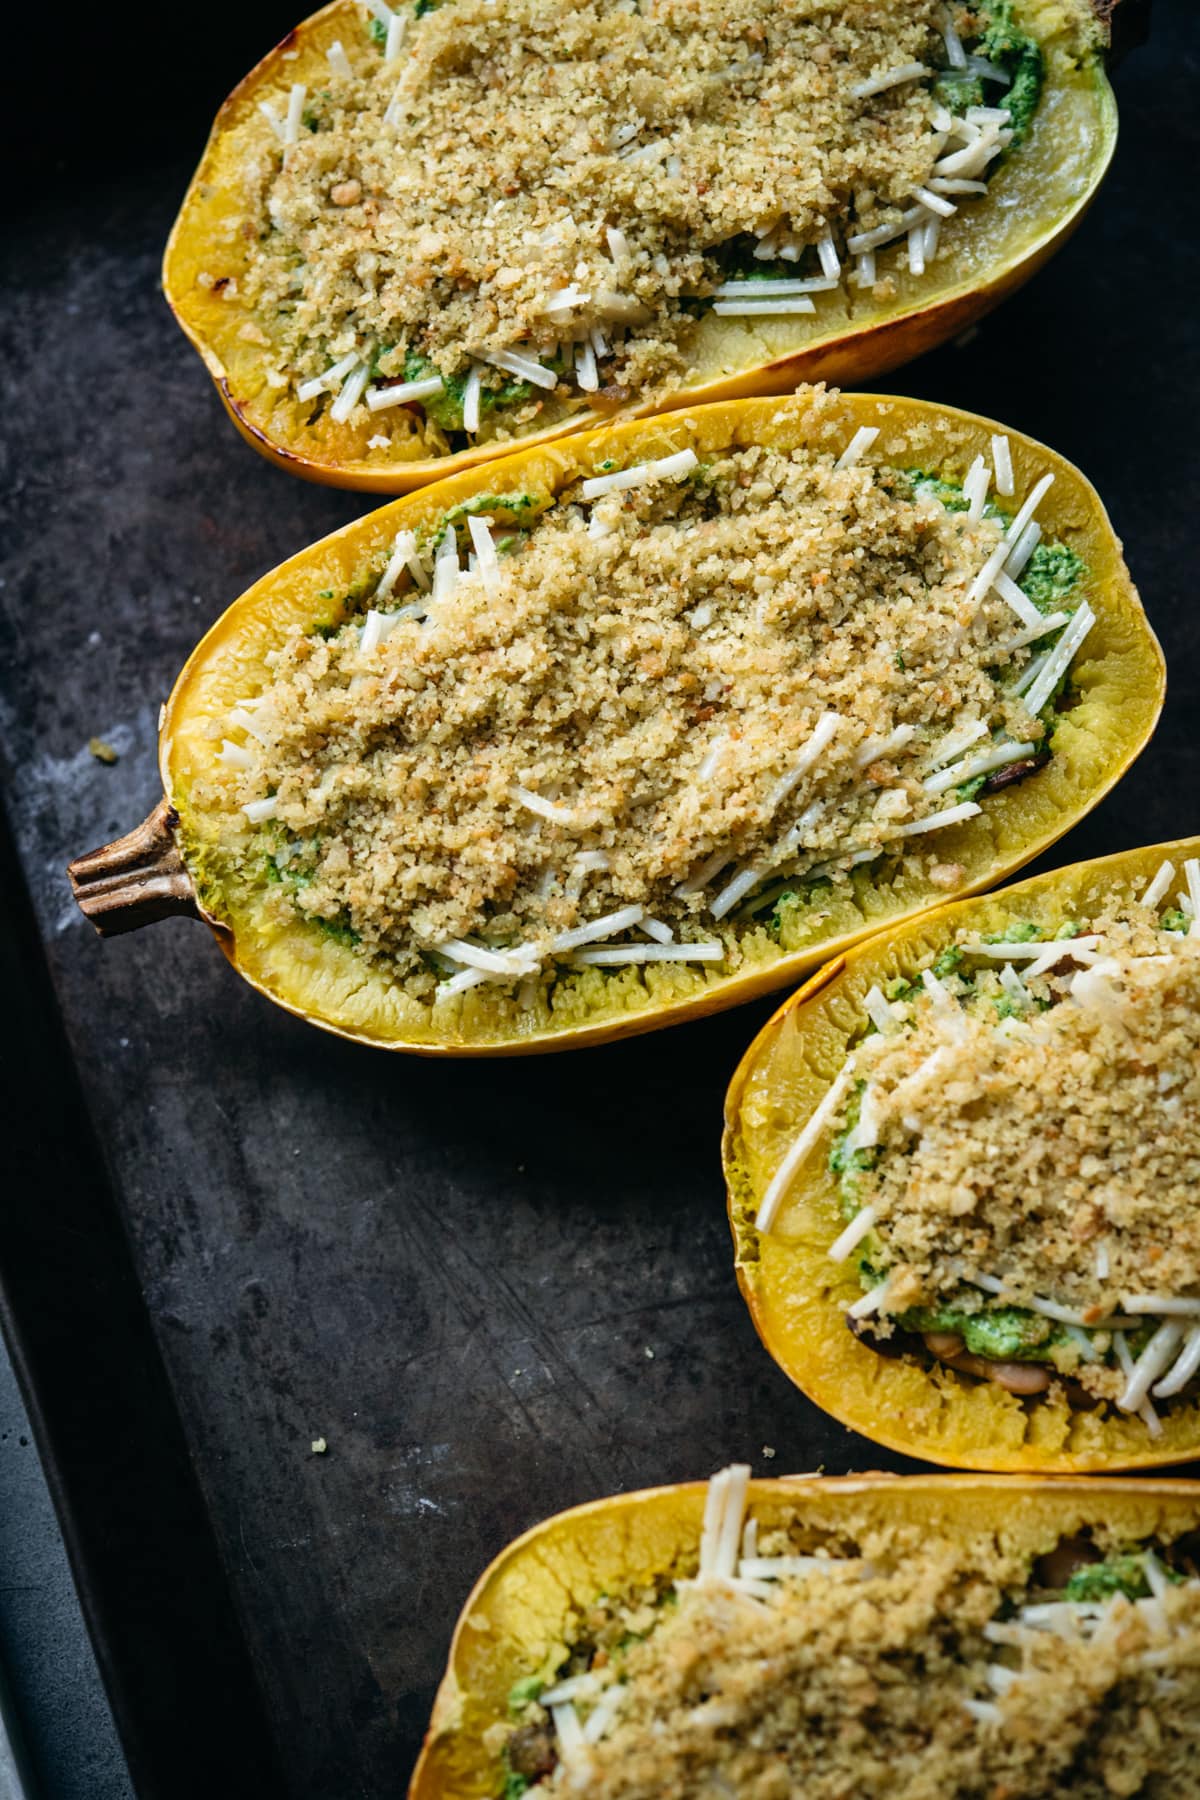 spaghetti squash topped with cheese and breadcrumbs.